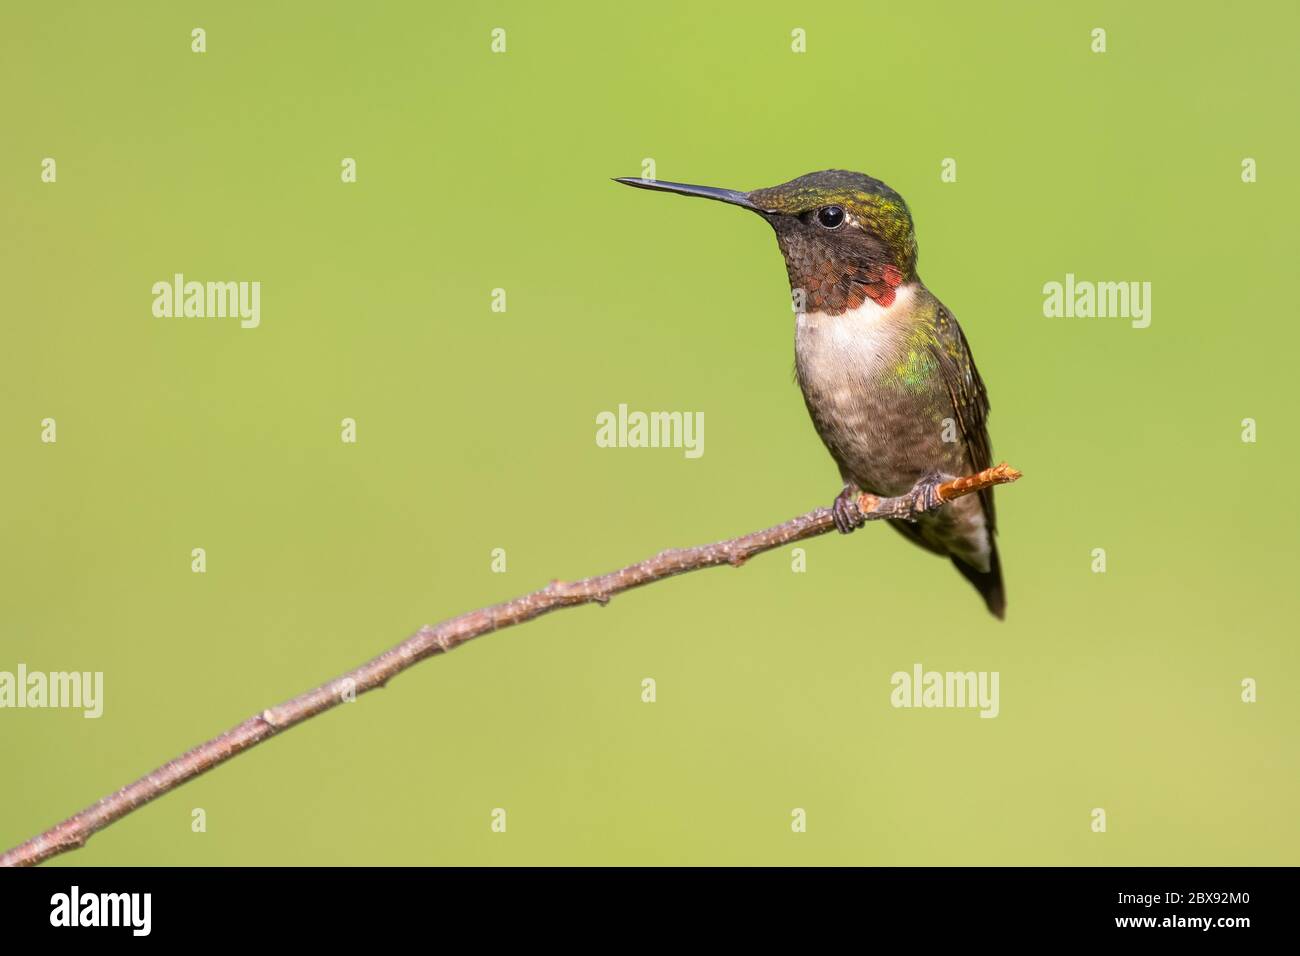 A ruby-throated hummingbird perched. Stock Photo